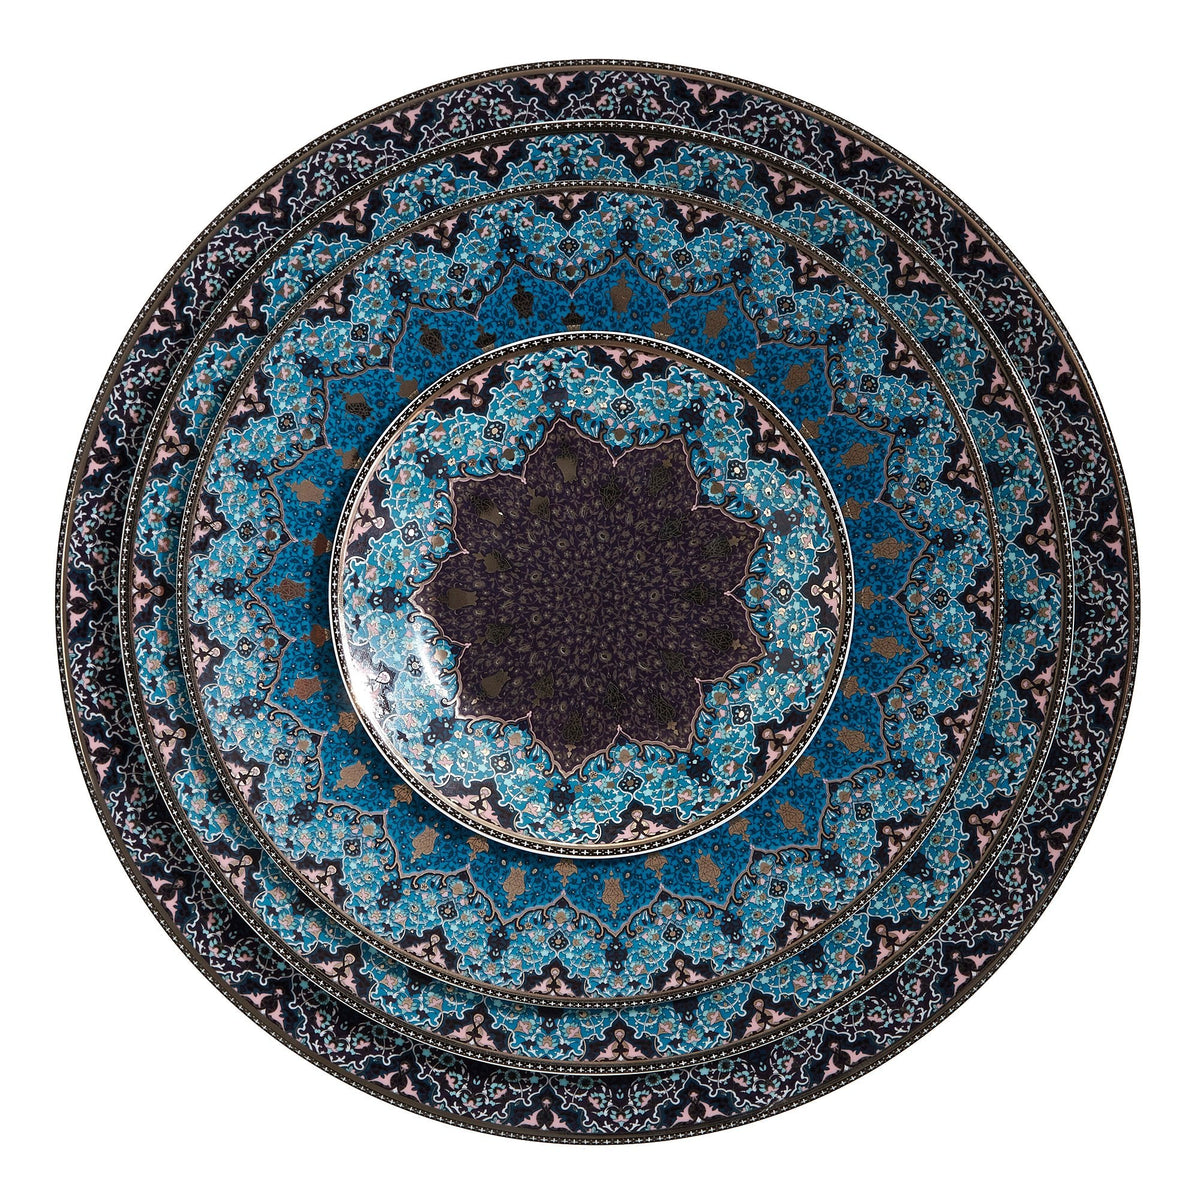 Dhara Peacock Bread and Butter Plate